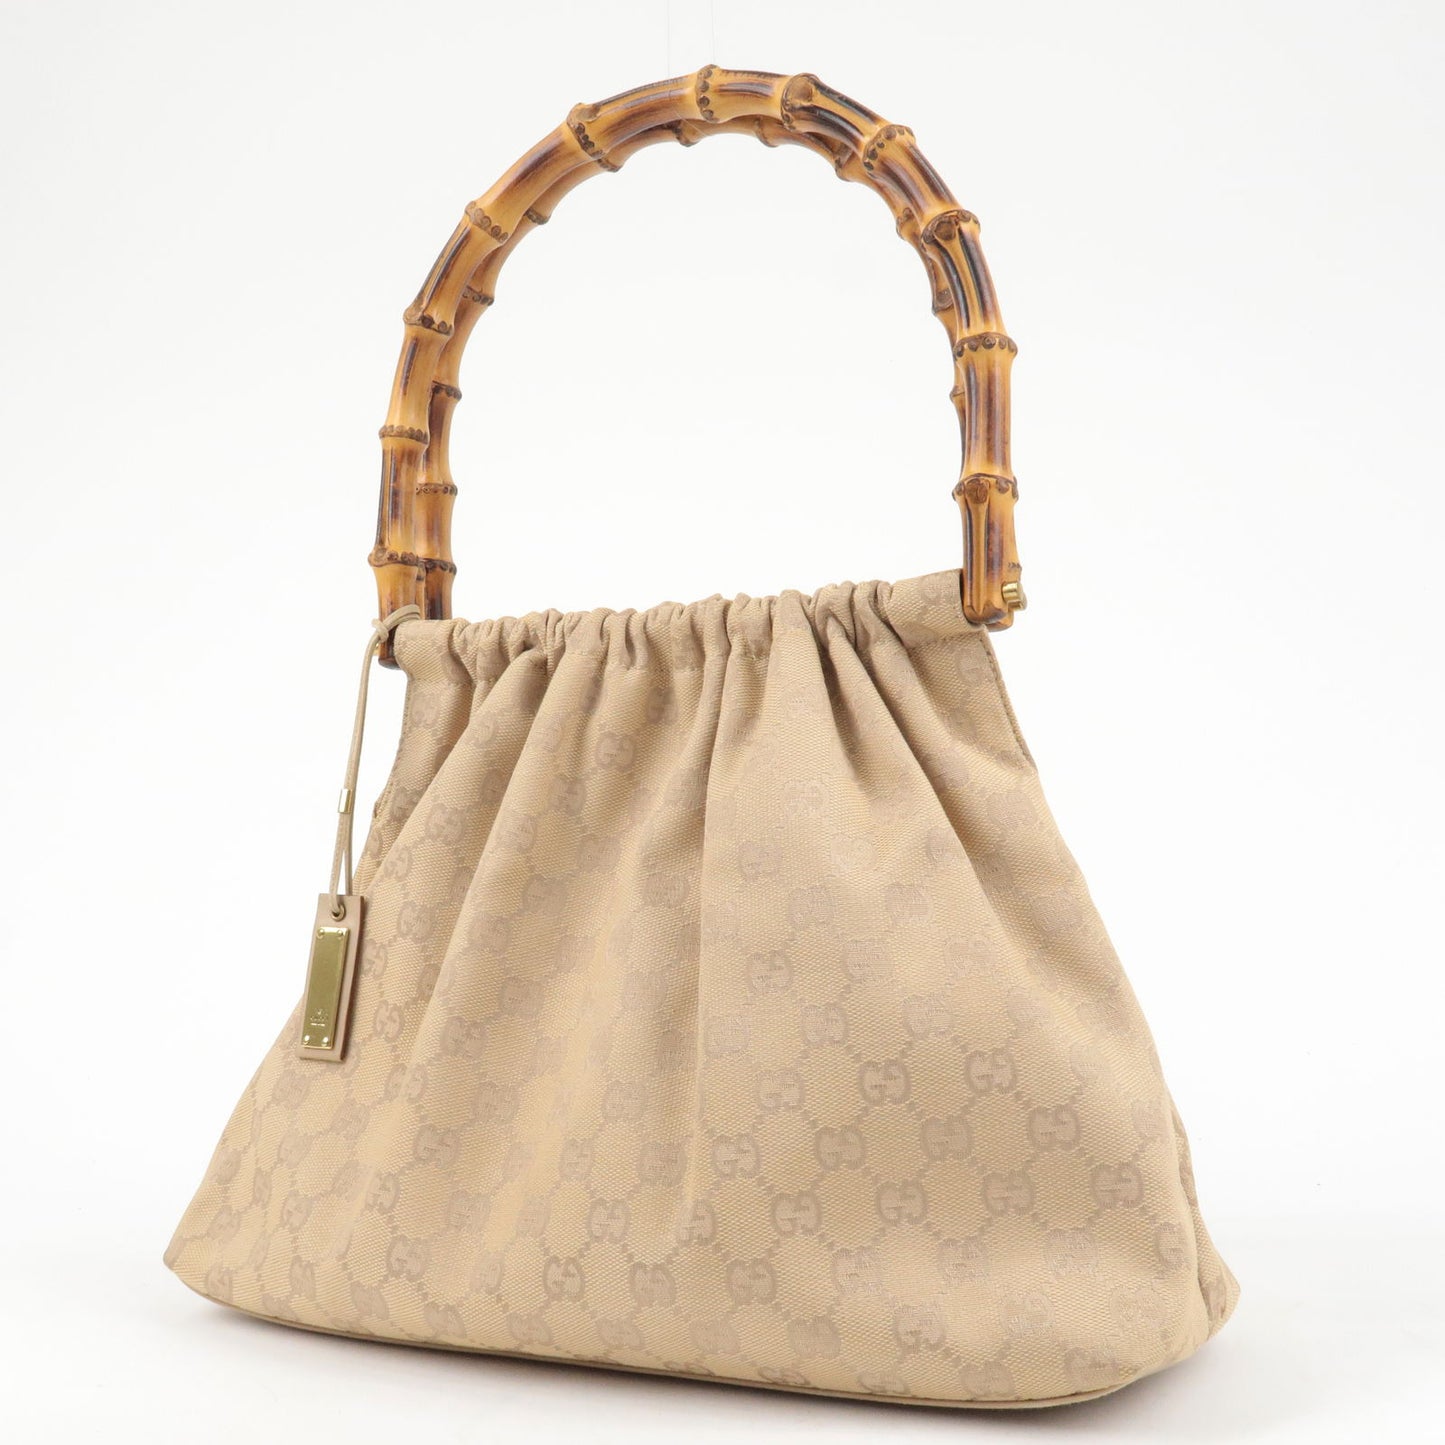 GUCCI Bamboo GG Canvas Leather Shoulder Bag Beige 92708